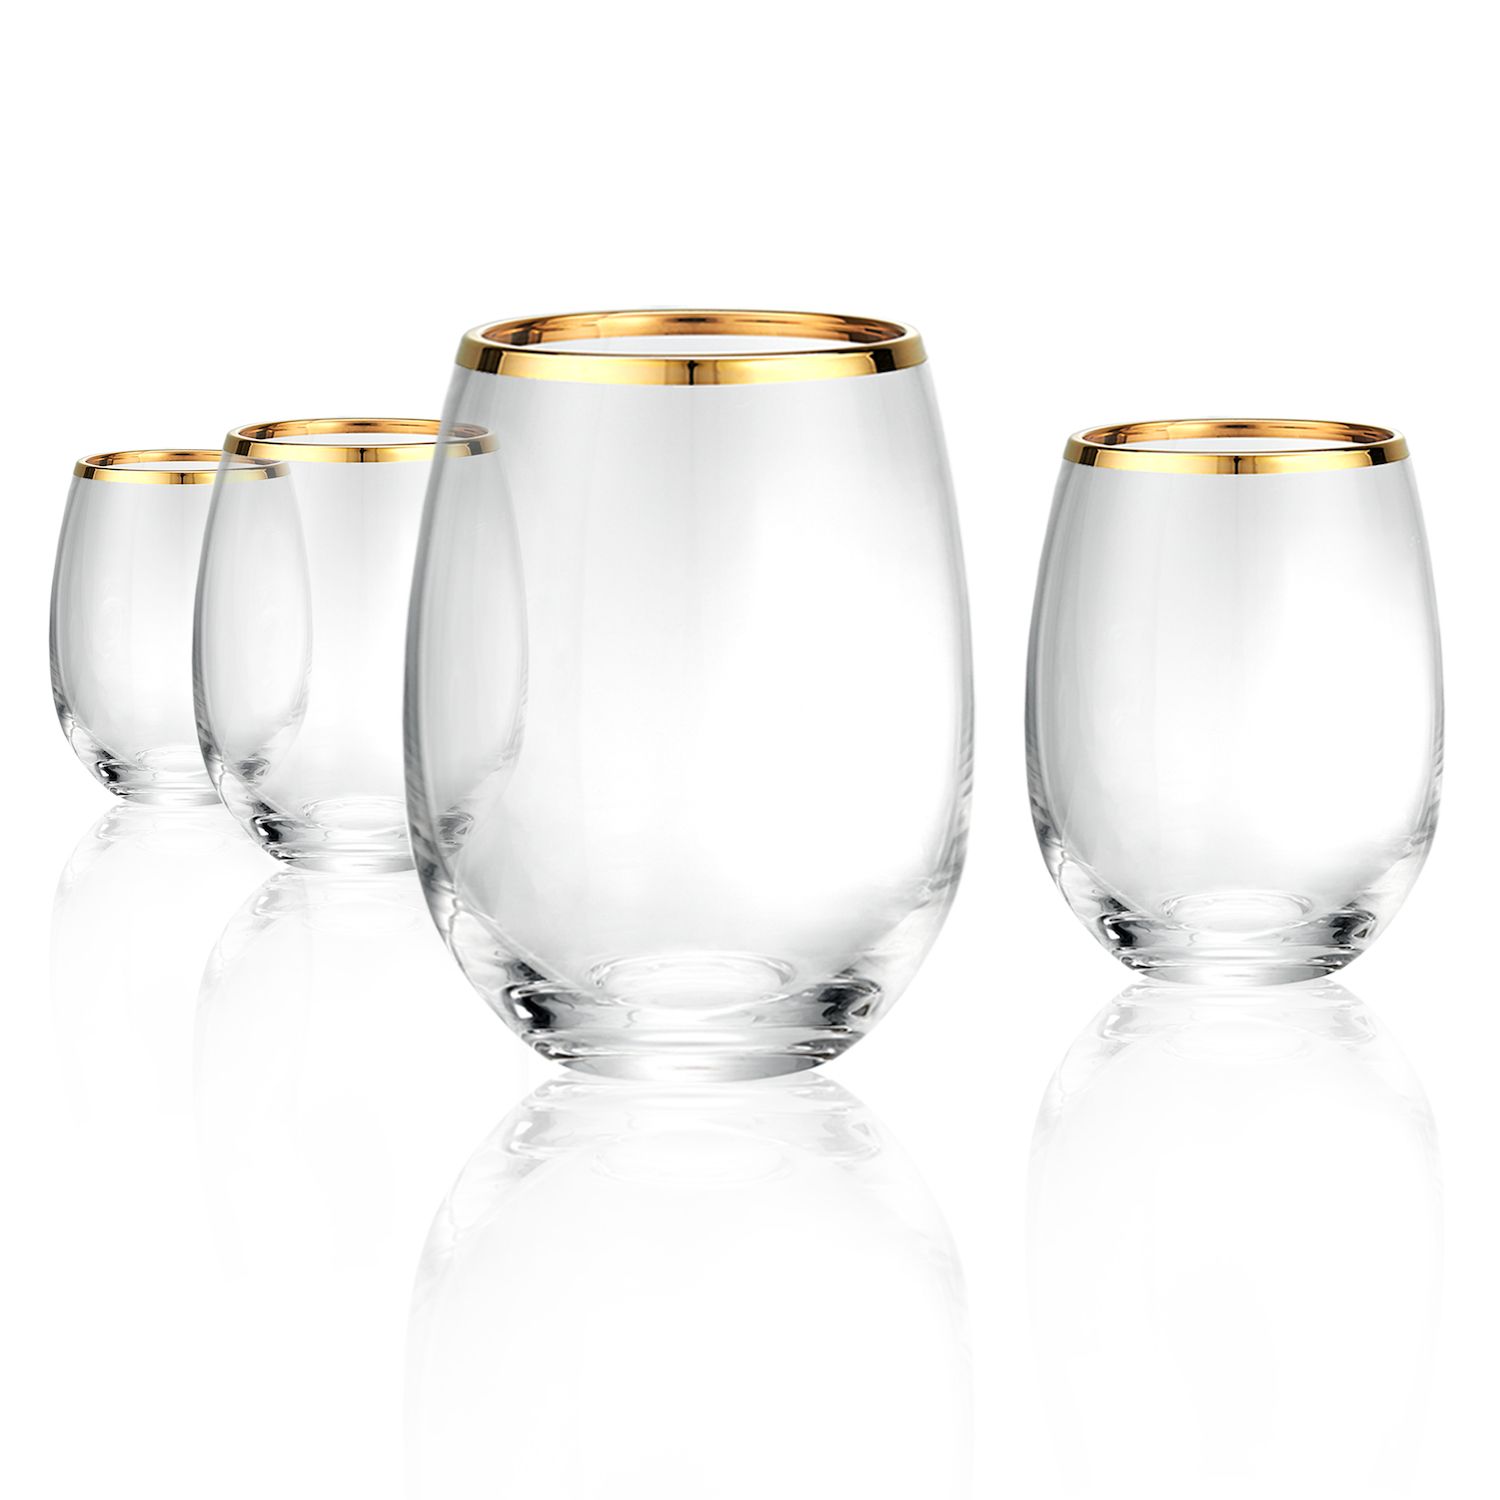 4 Pack Iridescent Champagne Flutes, Stemless Wine Glasses for